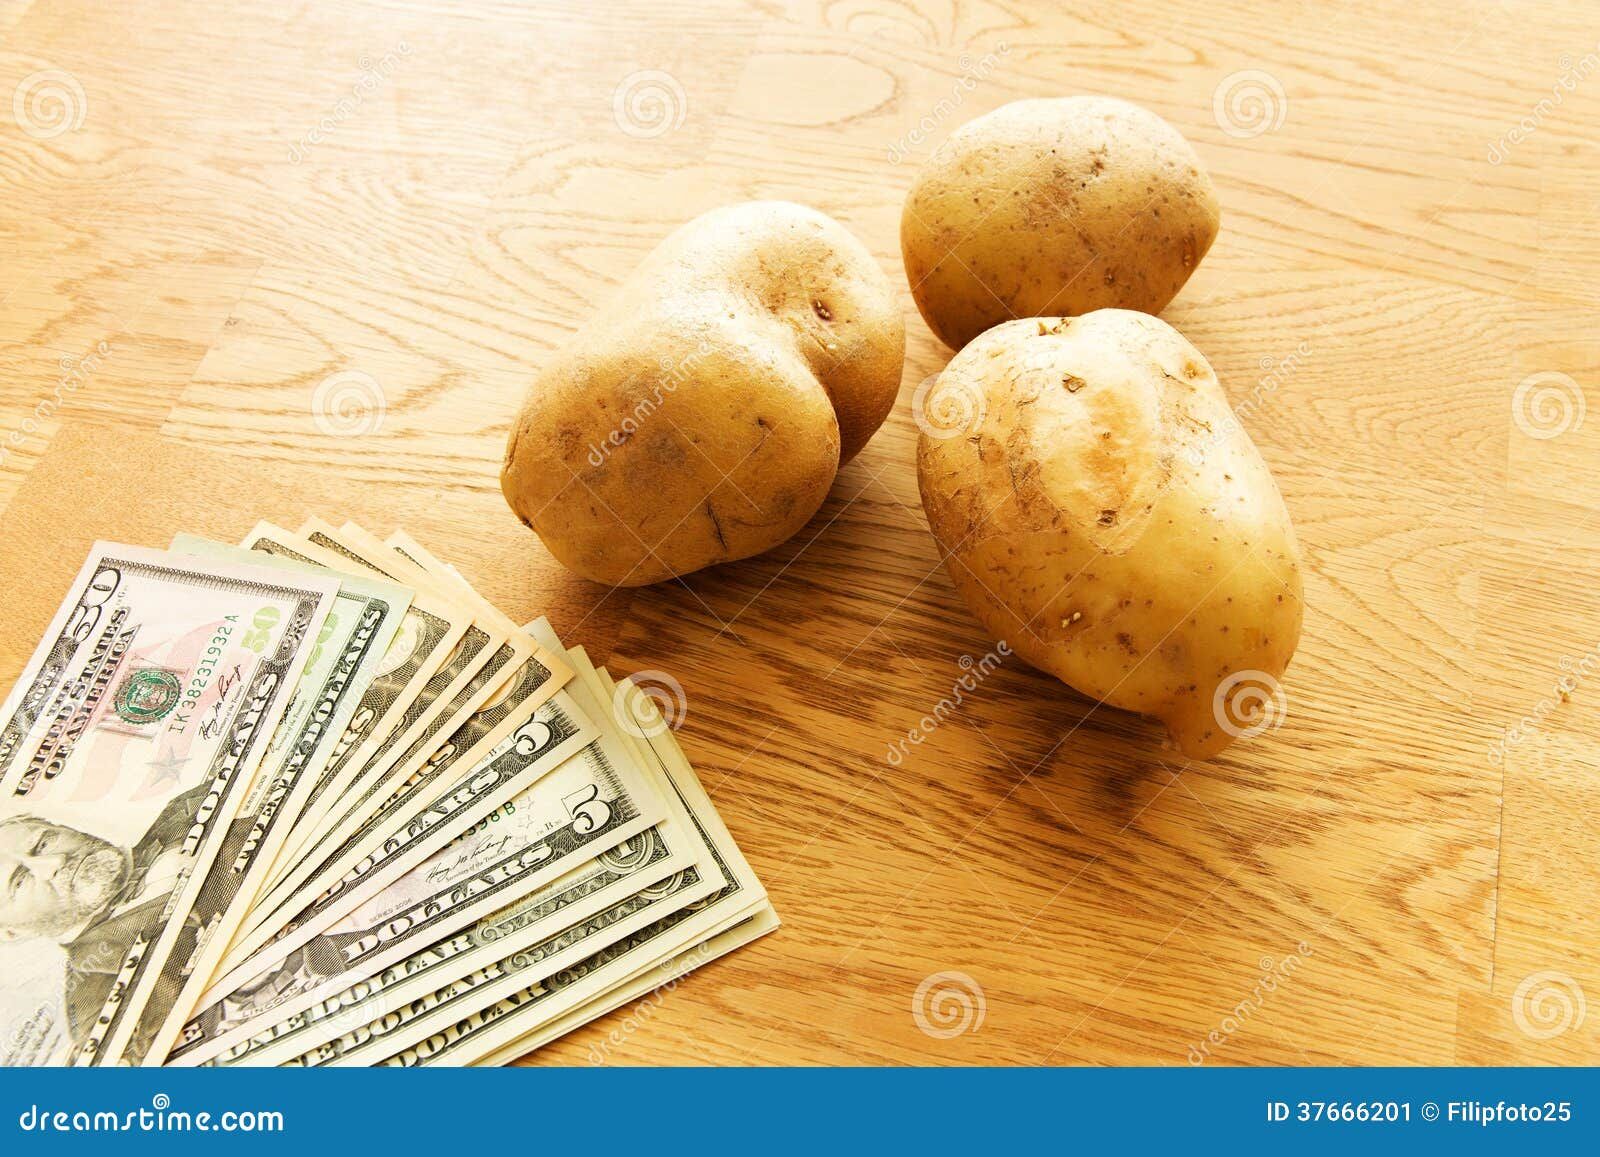 Potatoes and money stock image. Image of industry, problems - 37666201